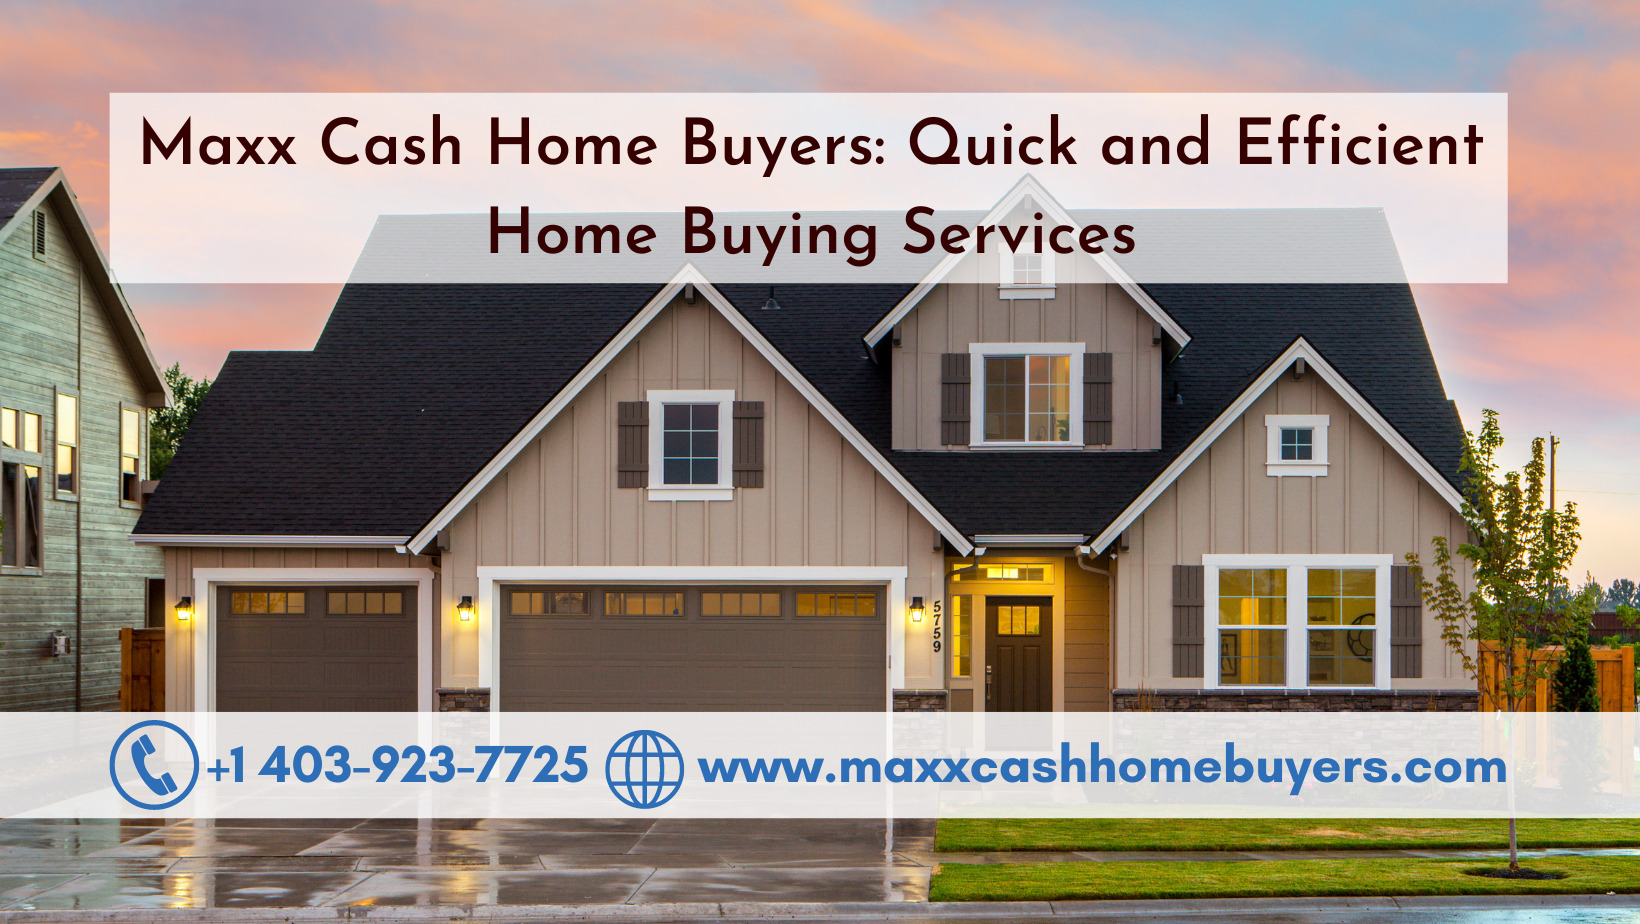 Maximum Cash Home Buyers Quick and Efficient Home Buying Services